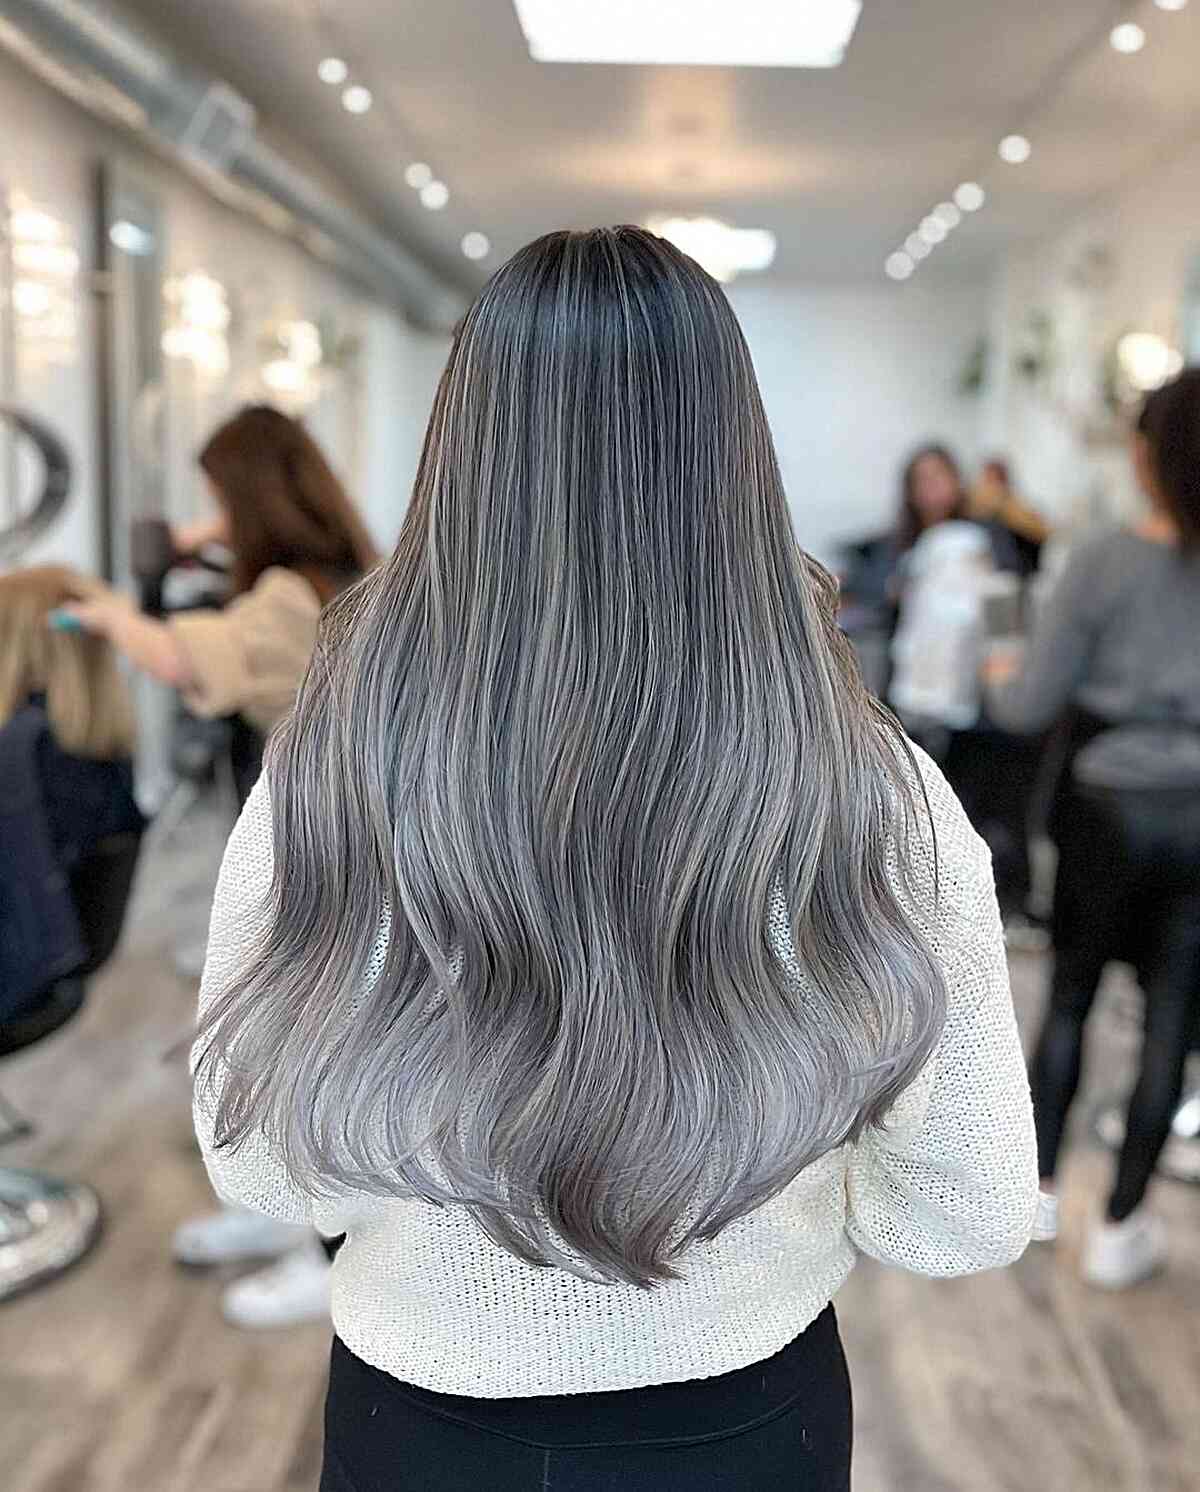 Long Metallic Grey Balayage Hair with Lighter Ends and Soft Waves